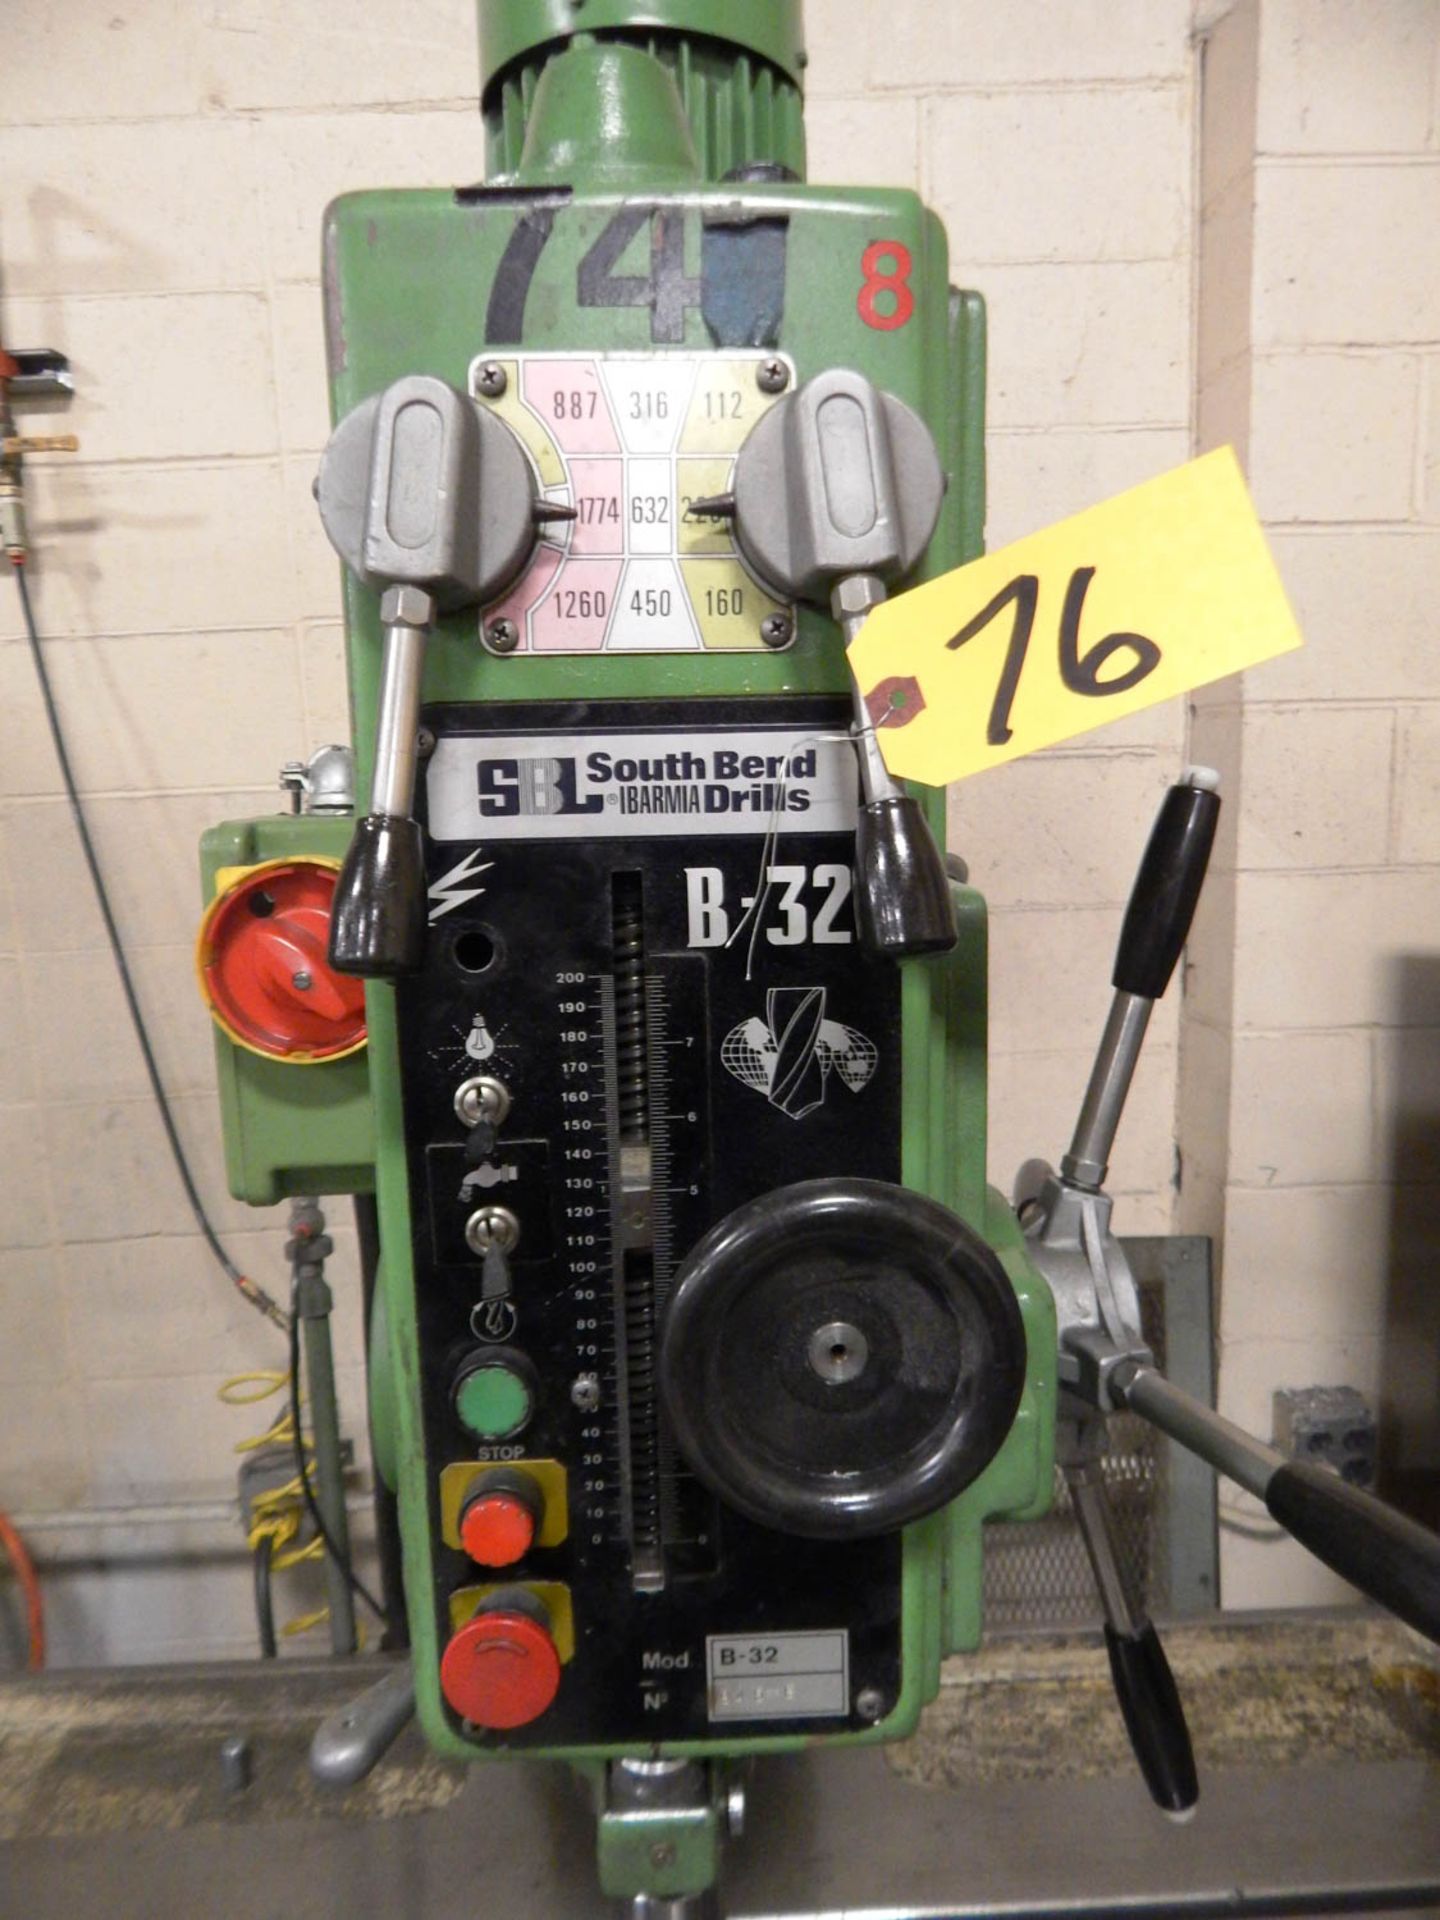 SOUTHBEND GEARED HEAD DRILL PRESS MDL B-32, 190-1774 RPM, 21'' X 44'' TABLE, S/N: 845-E - Image 3 of 3